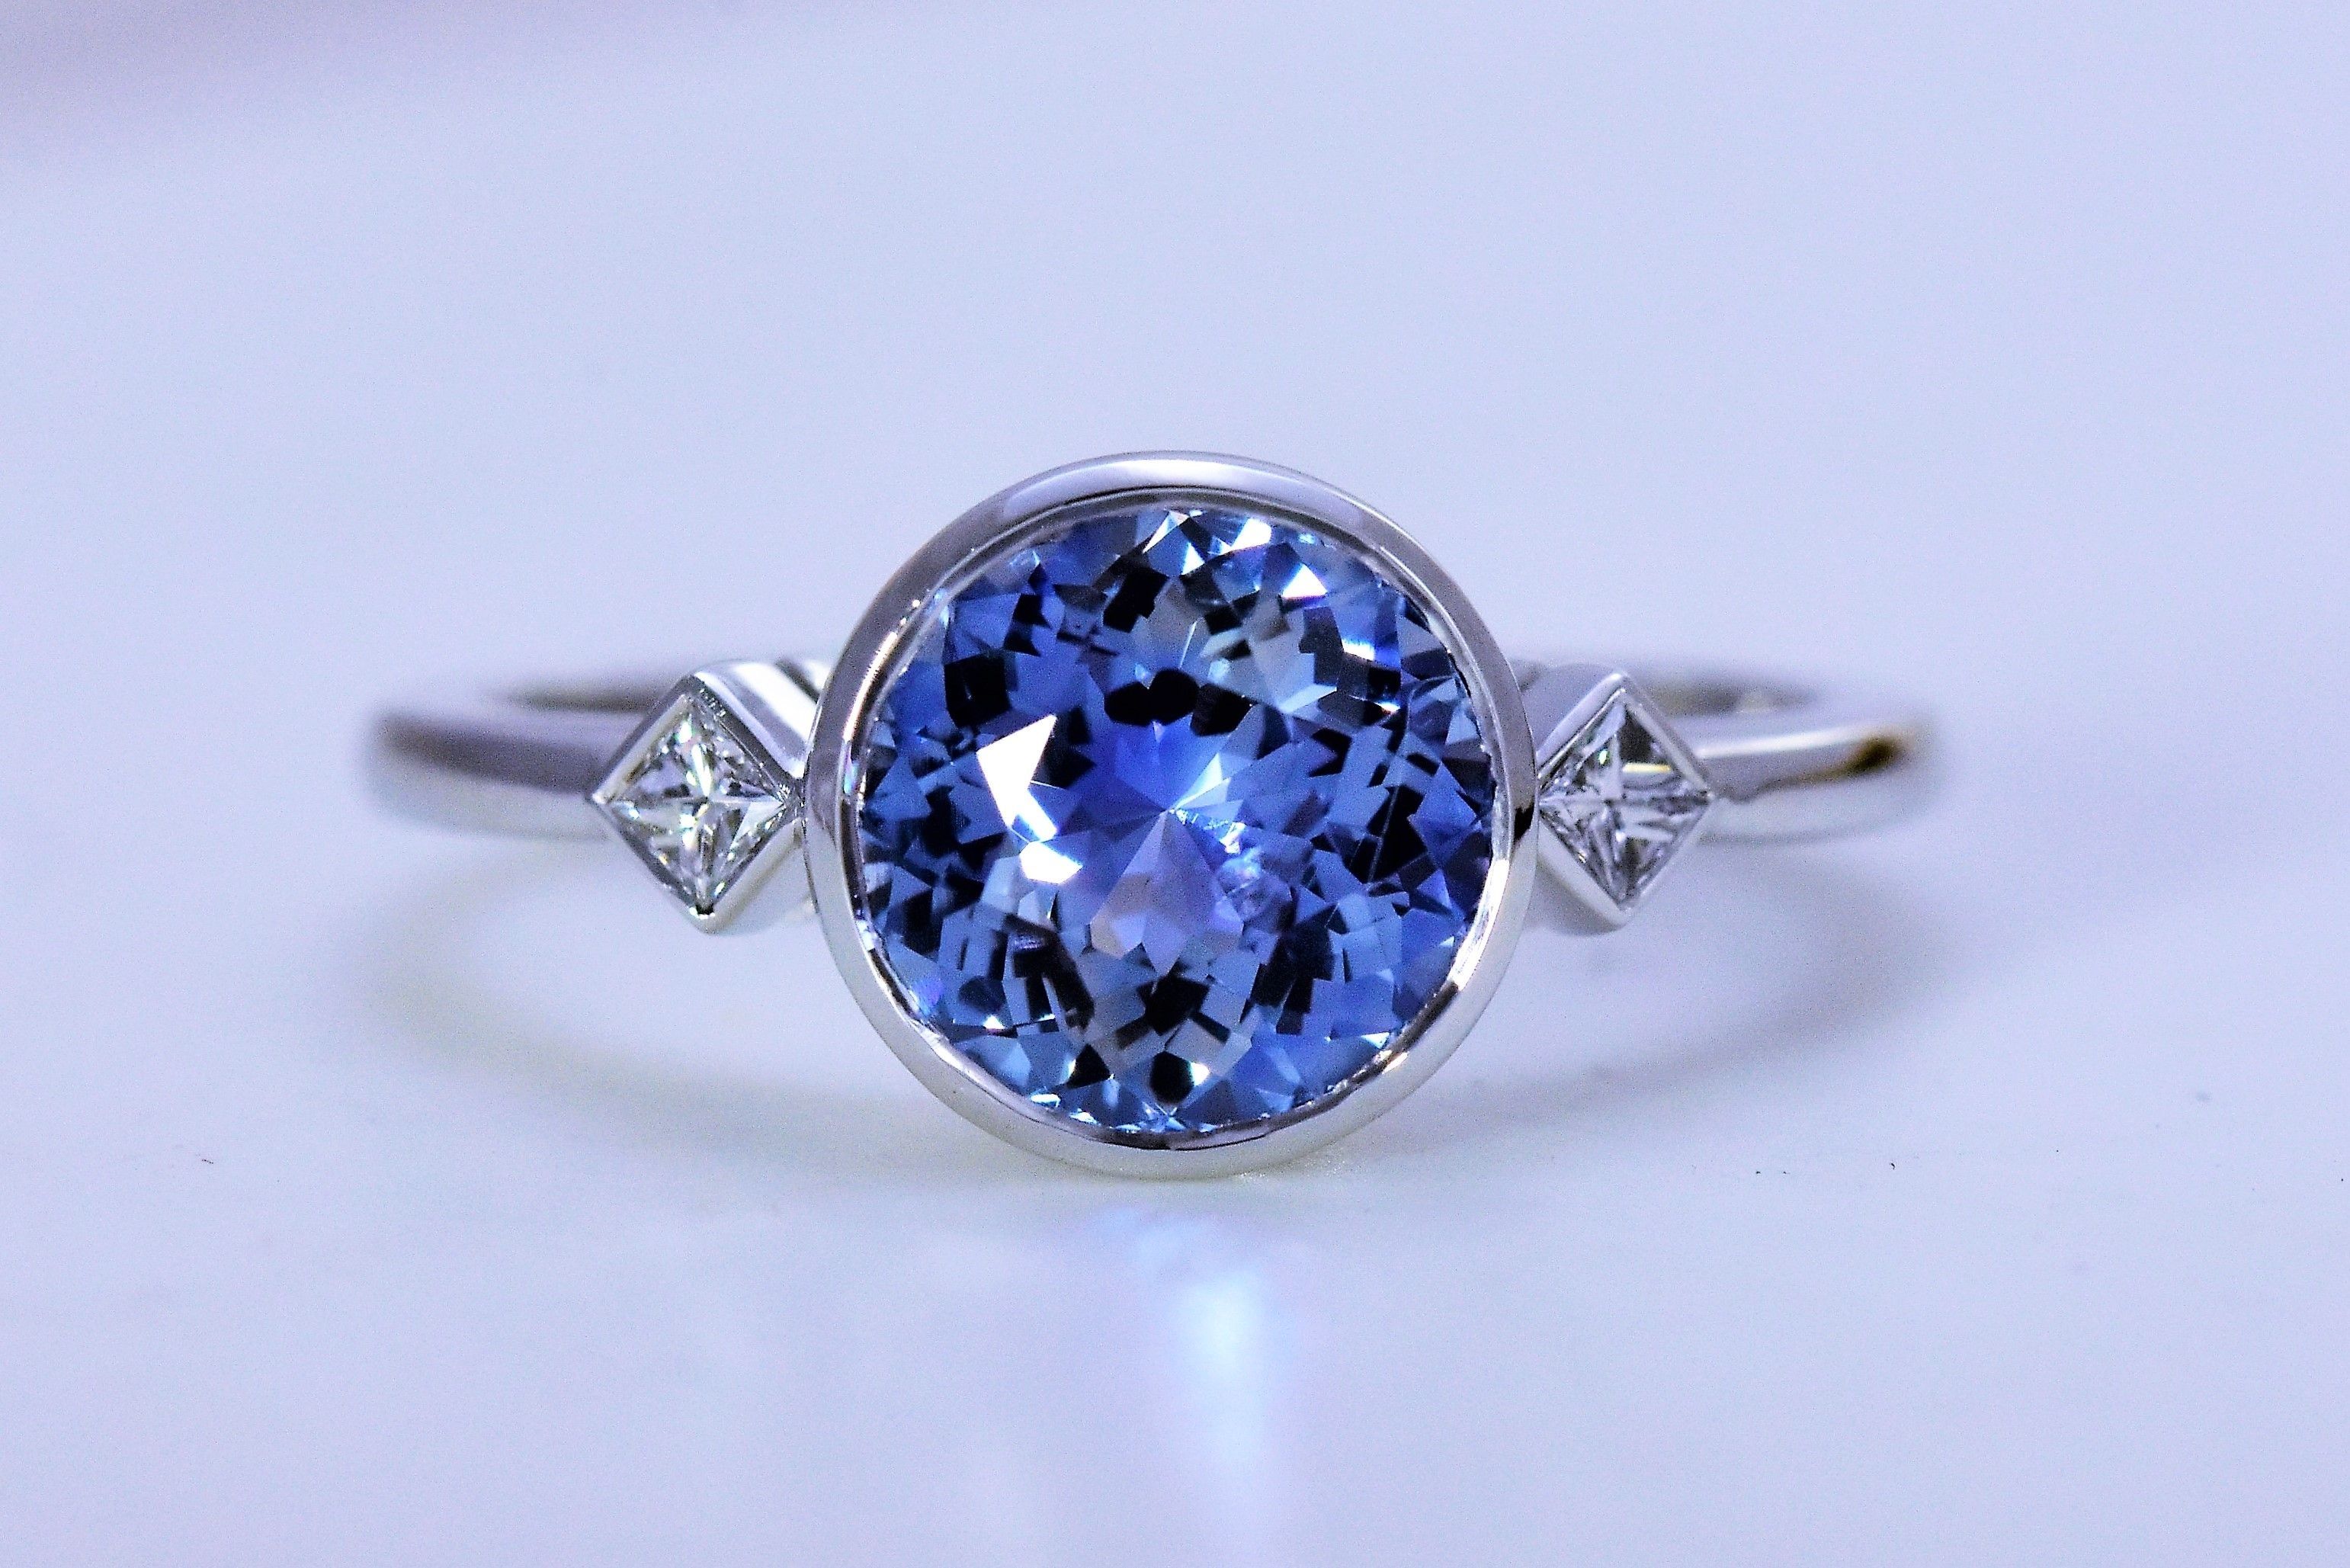 We Love This Gorgeous Sapphire And Diamond Three Stone Ring | Bling Inside Most Popular Diamond Cobalt Three Stone Hammered Rings (View 2 of 15)